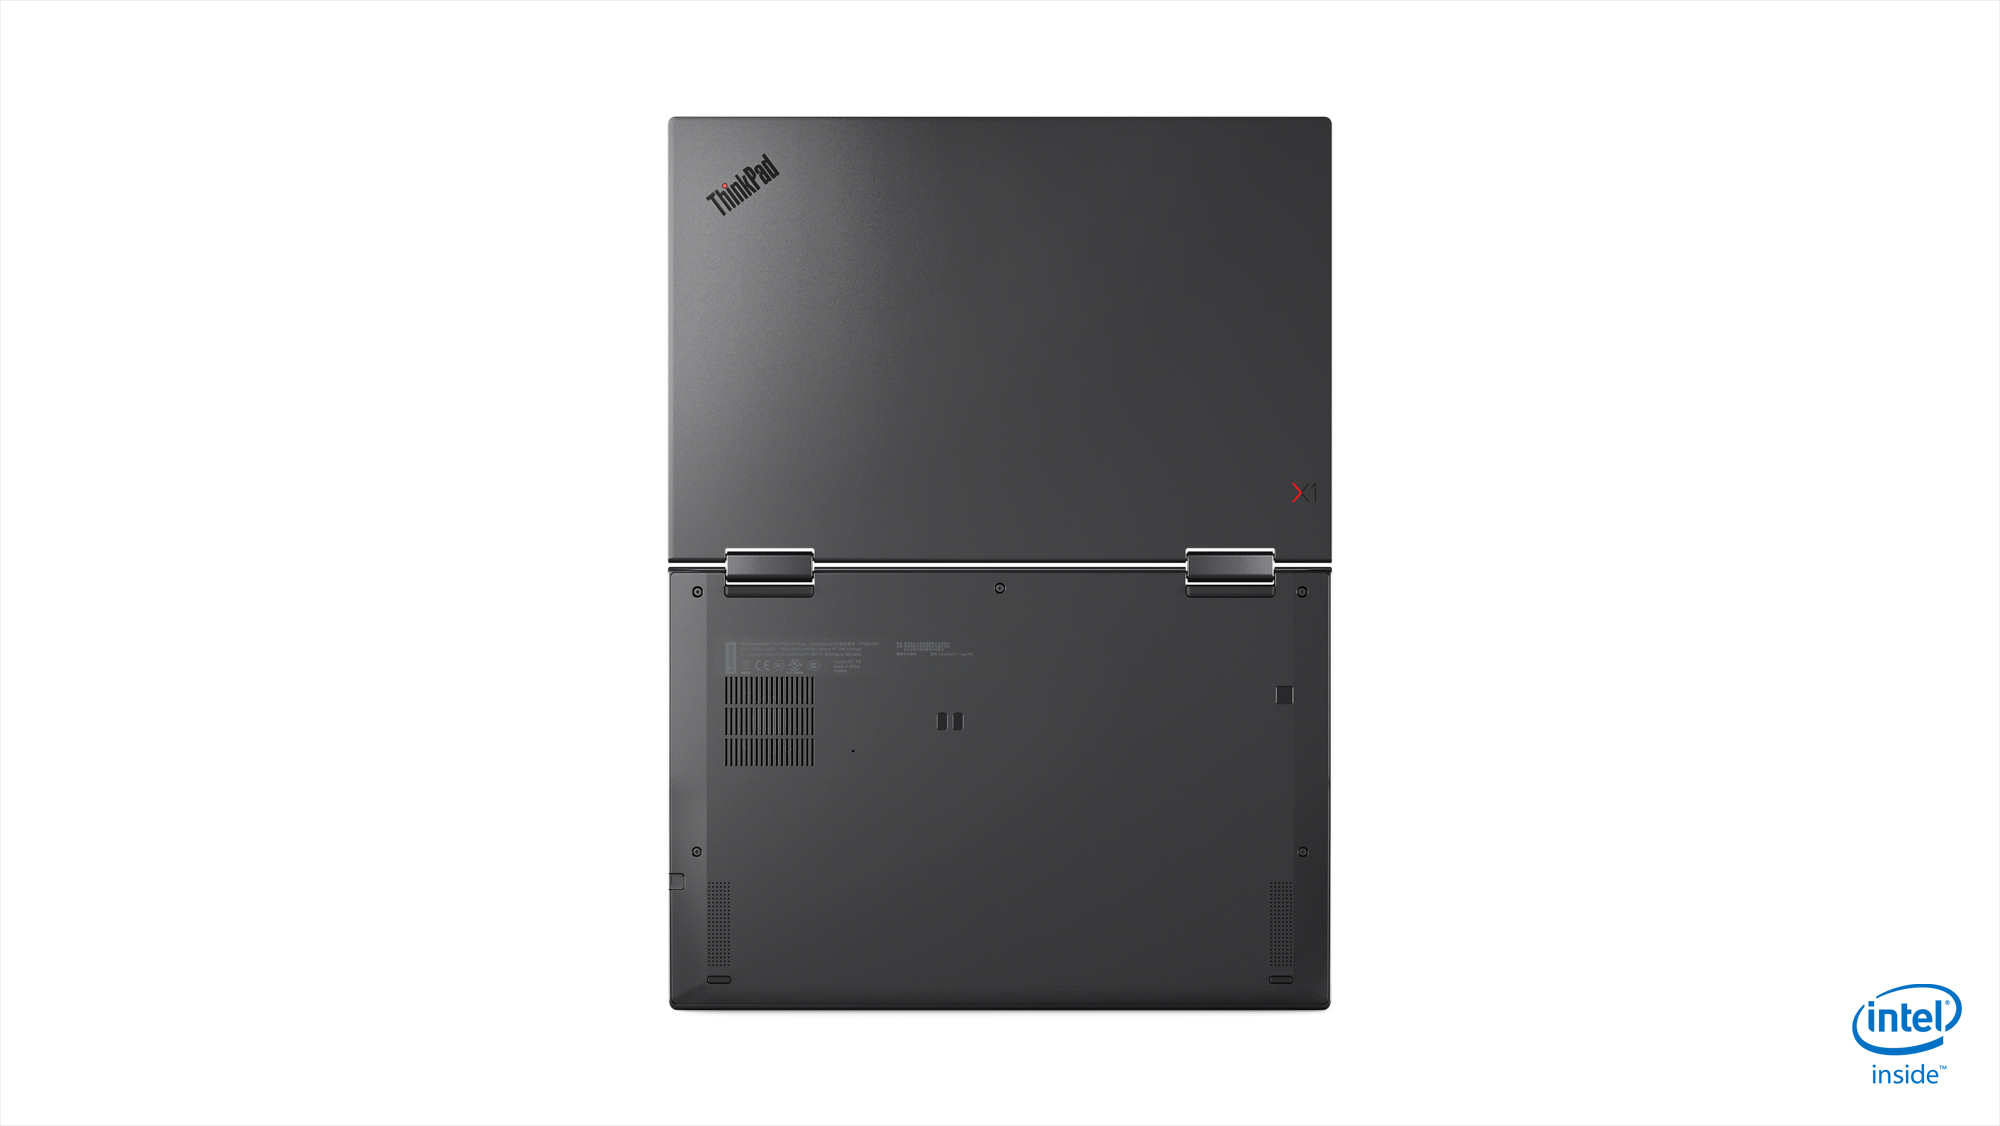 lenovo updated thinkpad x1 carbon yoga ces 2019 19 tour rear facing a d cover